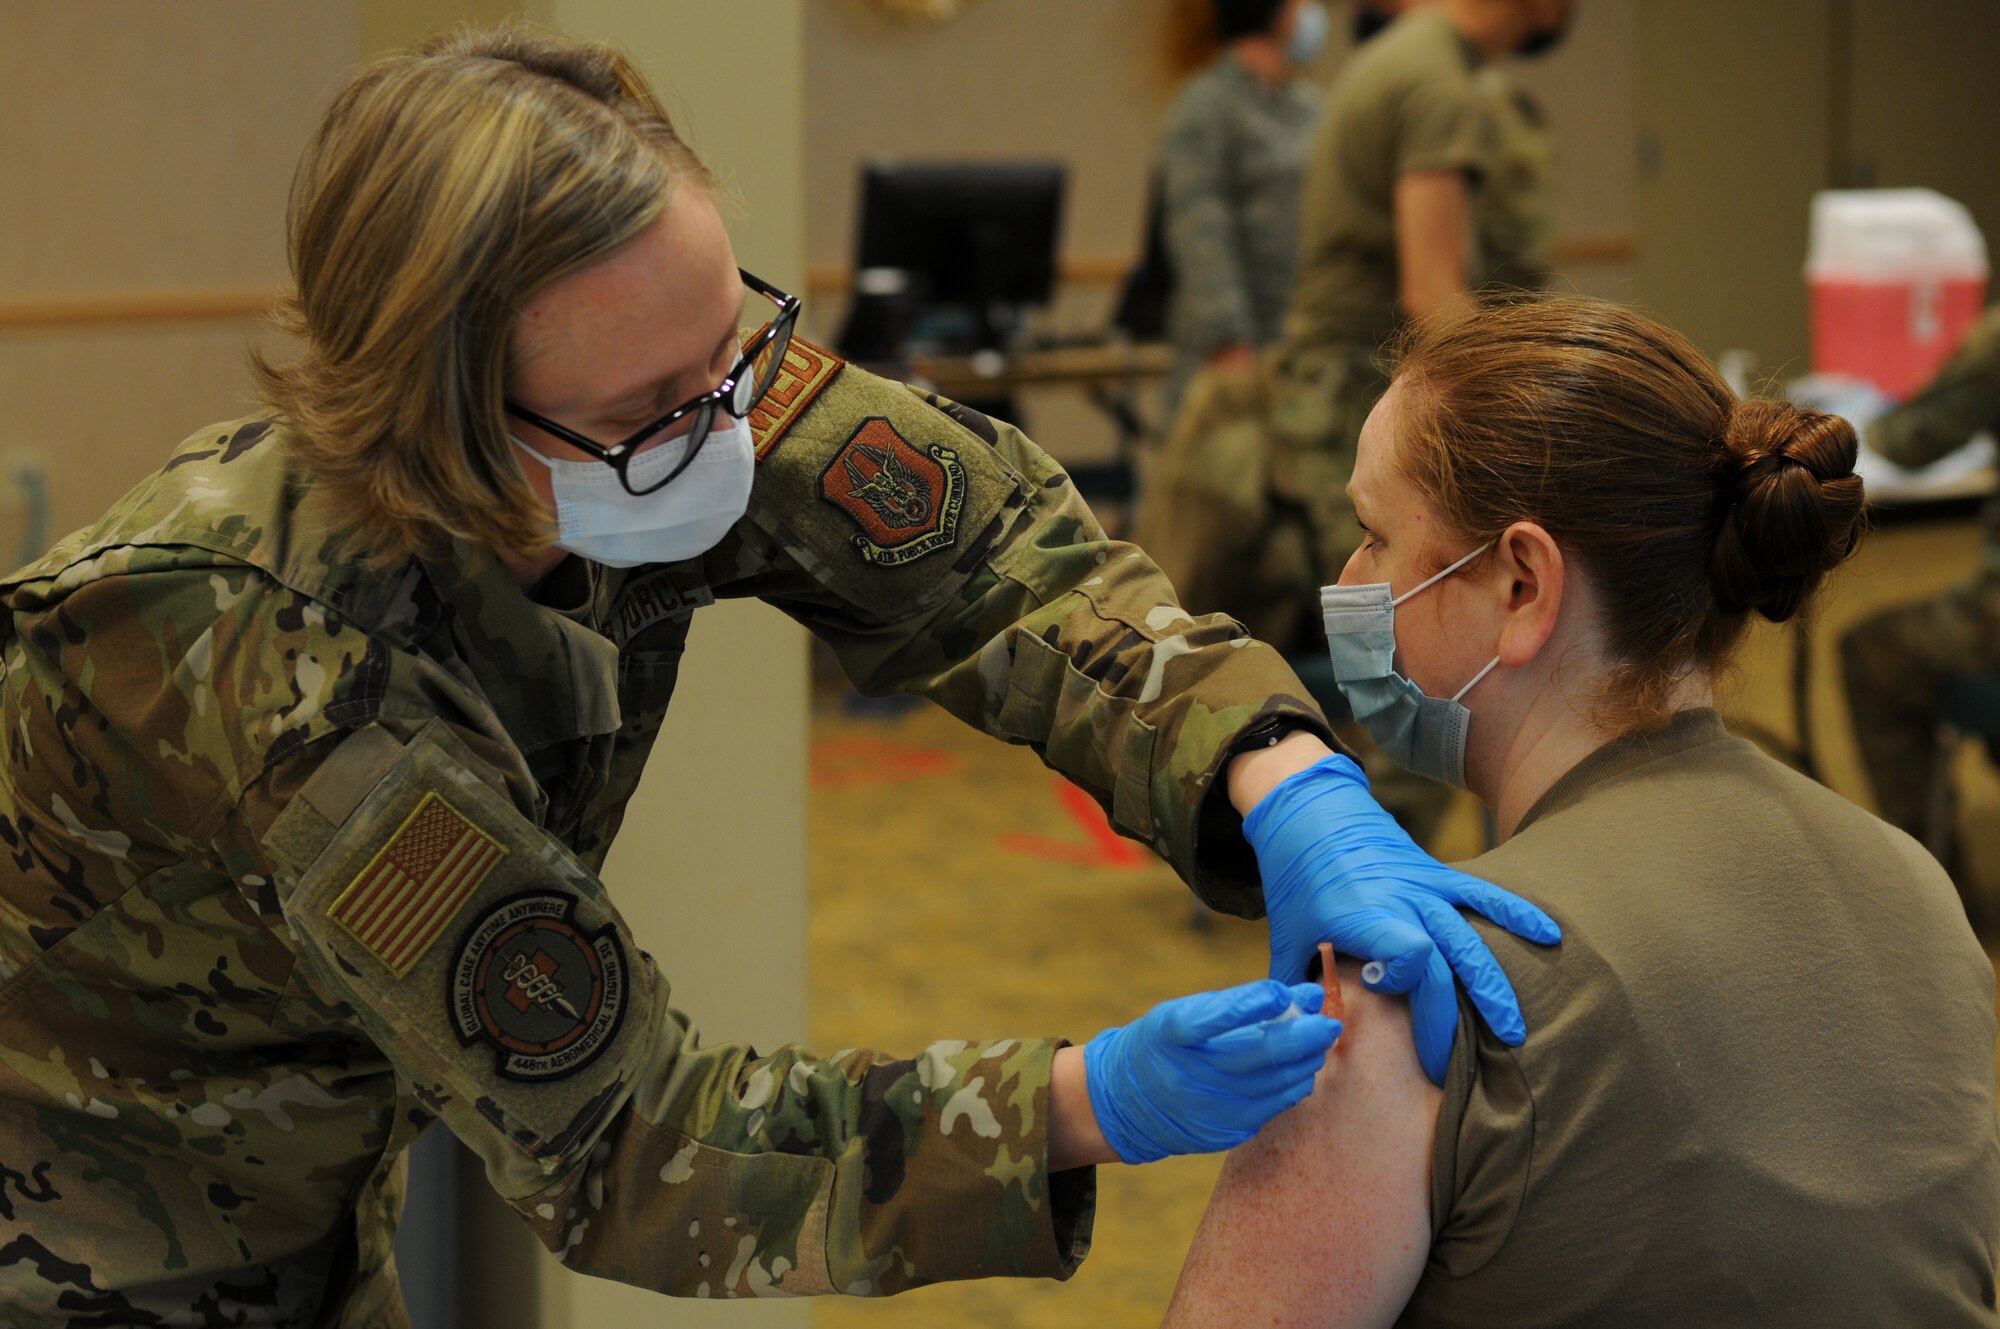 U.S. Air Force Tech. Sgt. Rosemary Nantz, a Reserve Citizen Airman with the 446th Aeromedical Staging Squadron, receives her first dose of the Moderna COVID-19 vaccine from Tech. Sgt. Sarah Hora, an Air Force Reserve medical technician with the 446th Aeromedical Staging Squadron, at Joint Base Lewis-McChord, Washington, Feb. 6, 2021